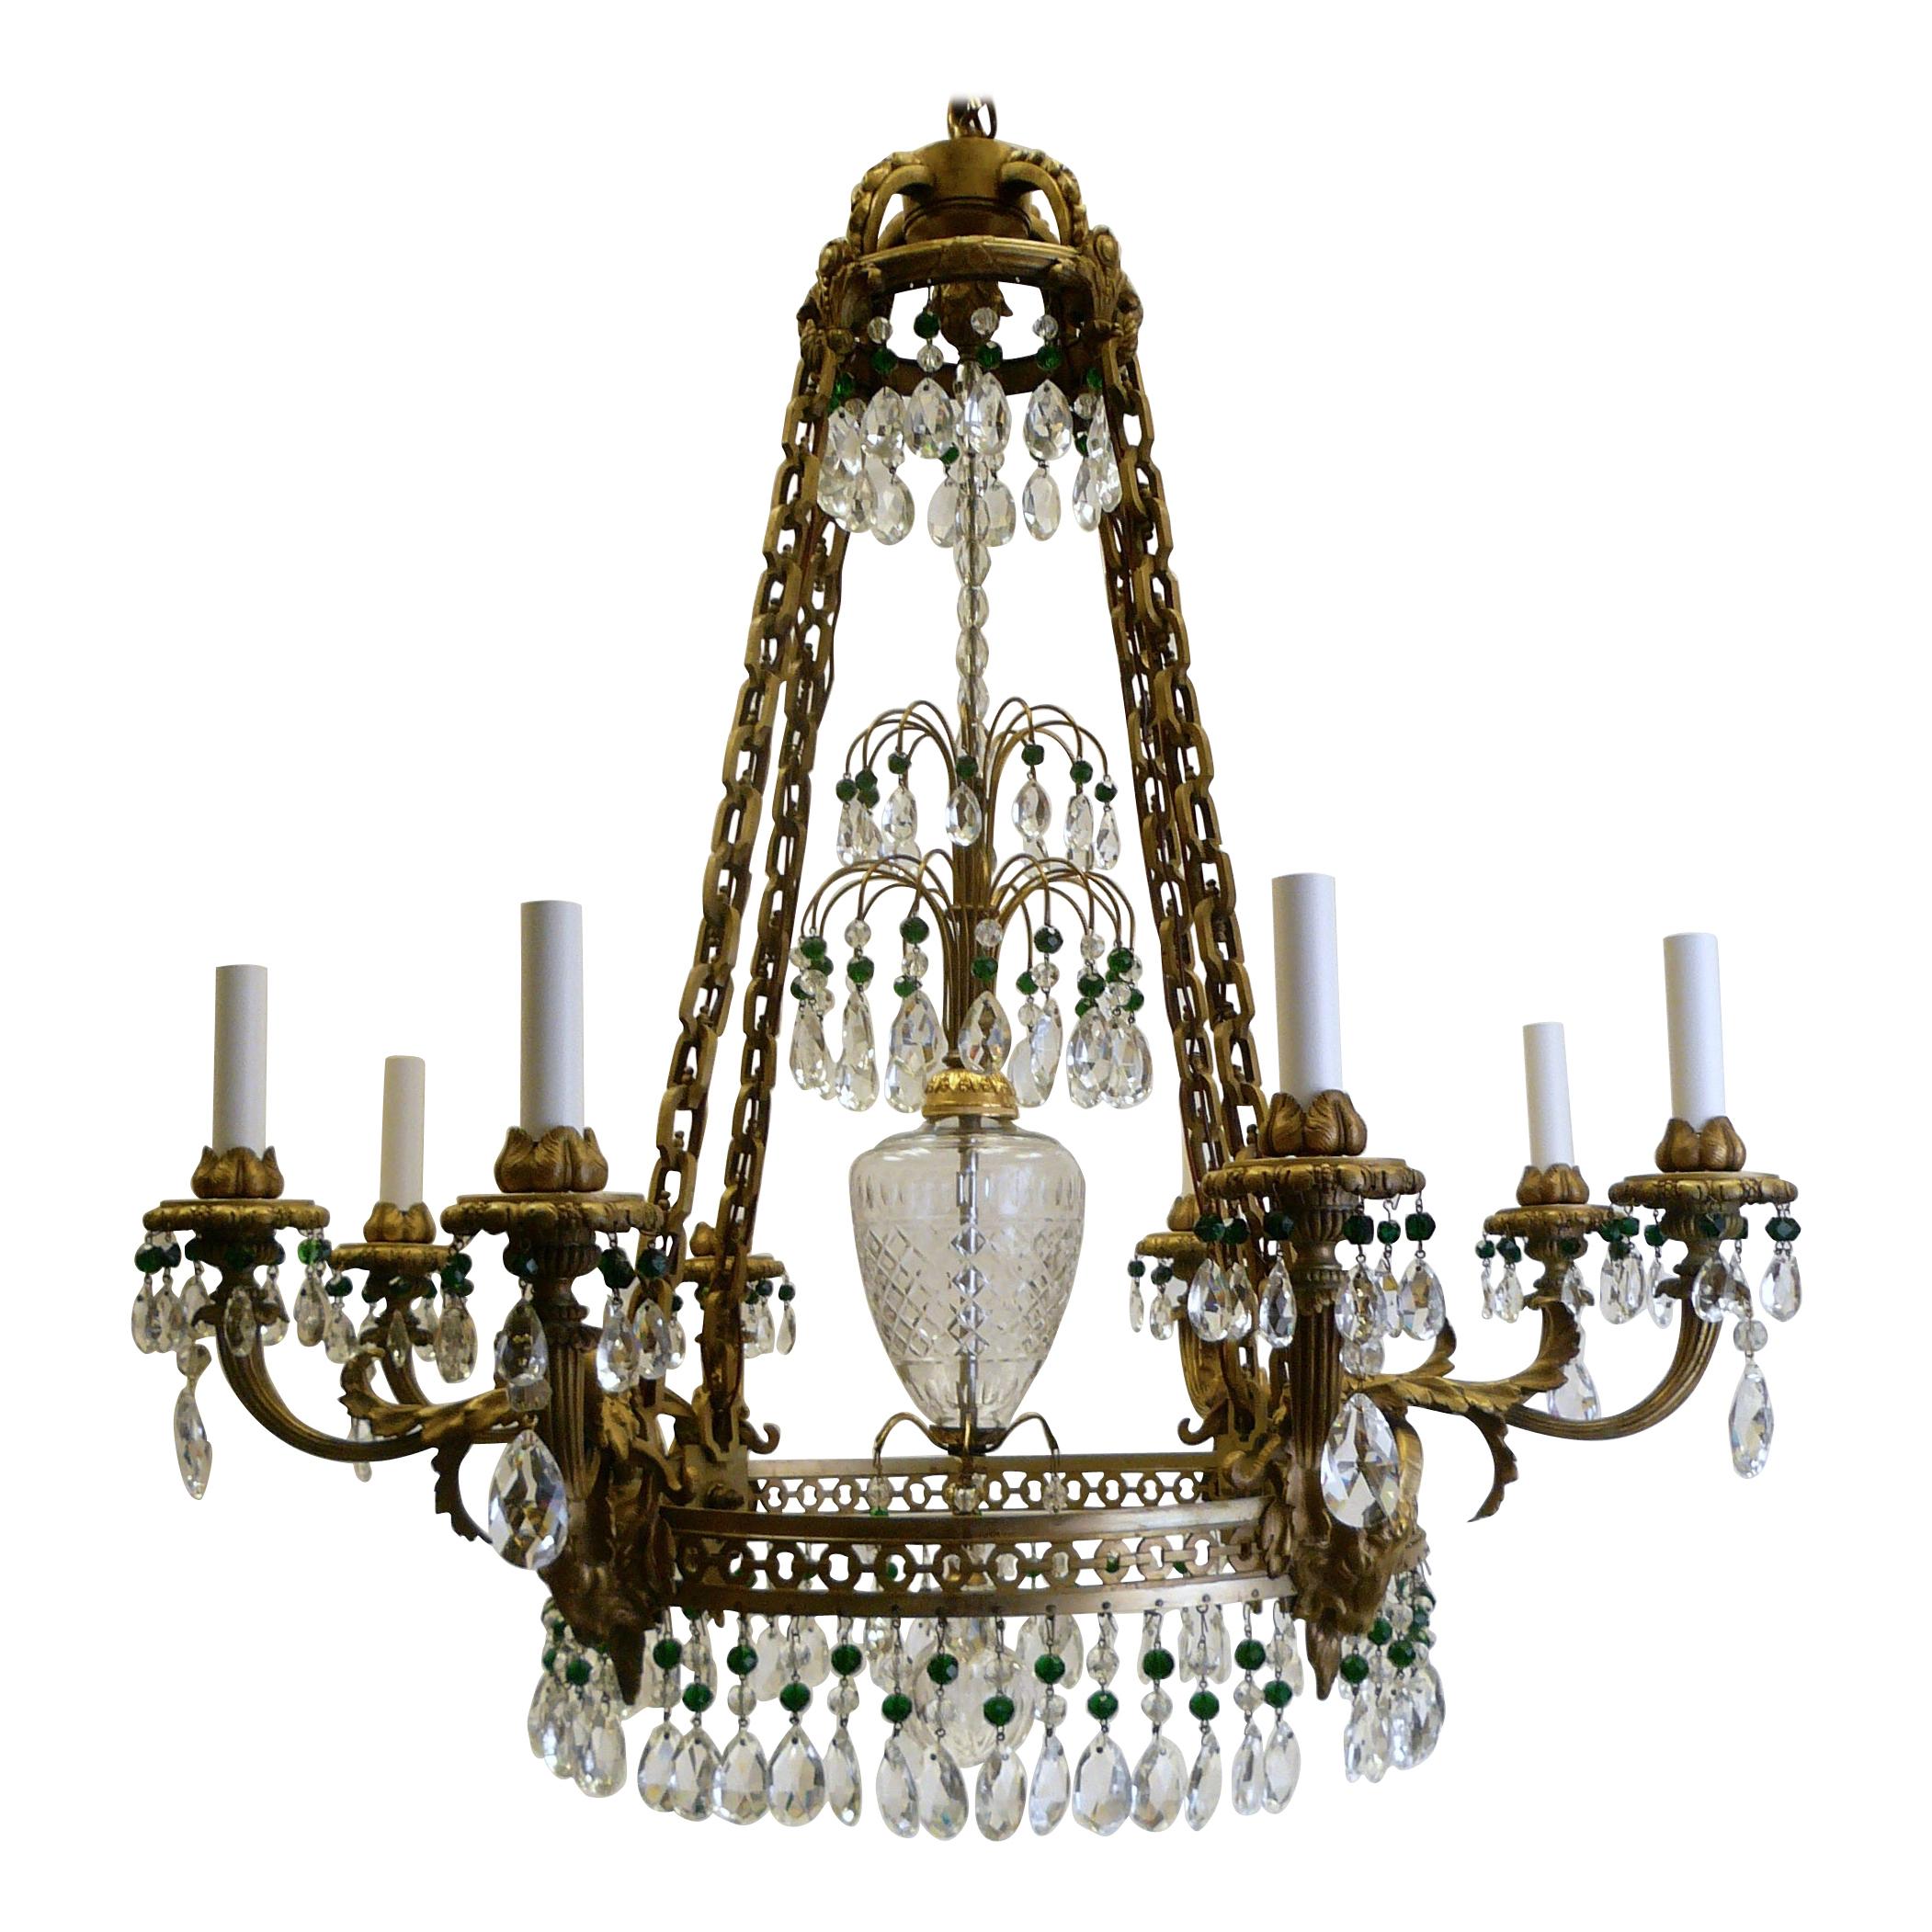 Russian Neoclassical or Baltic Style Bronze and Crystal Chandelier